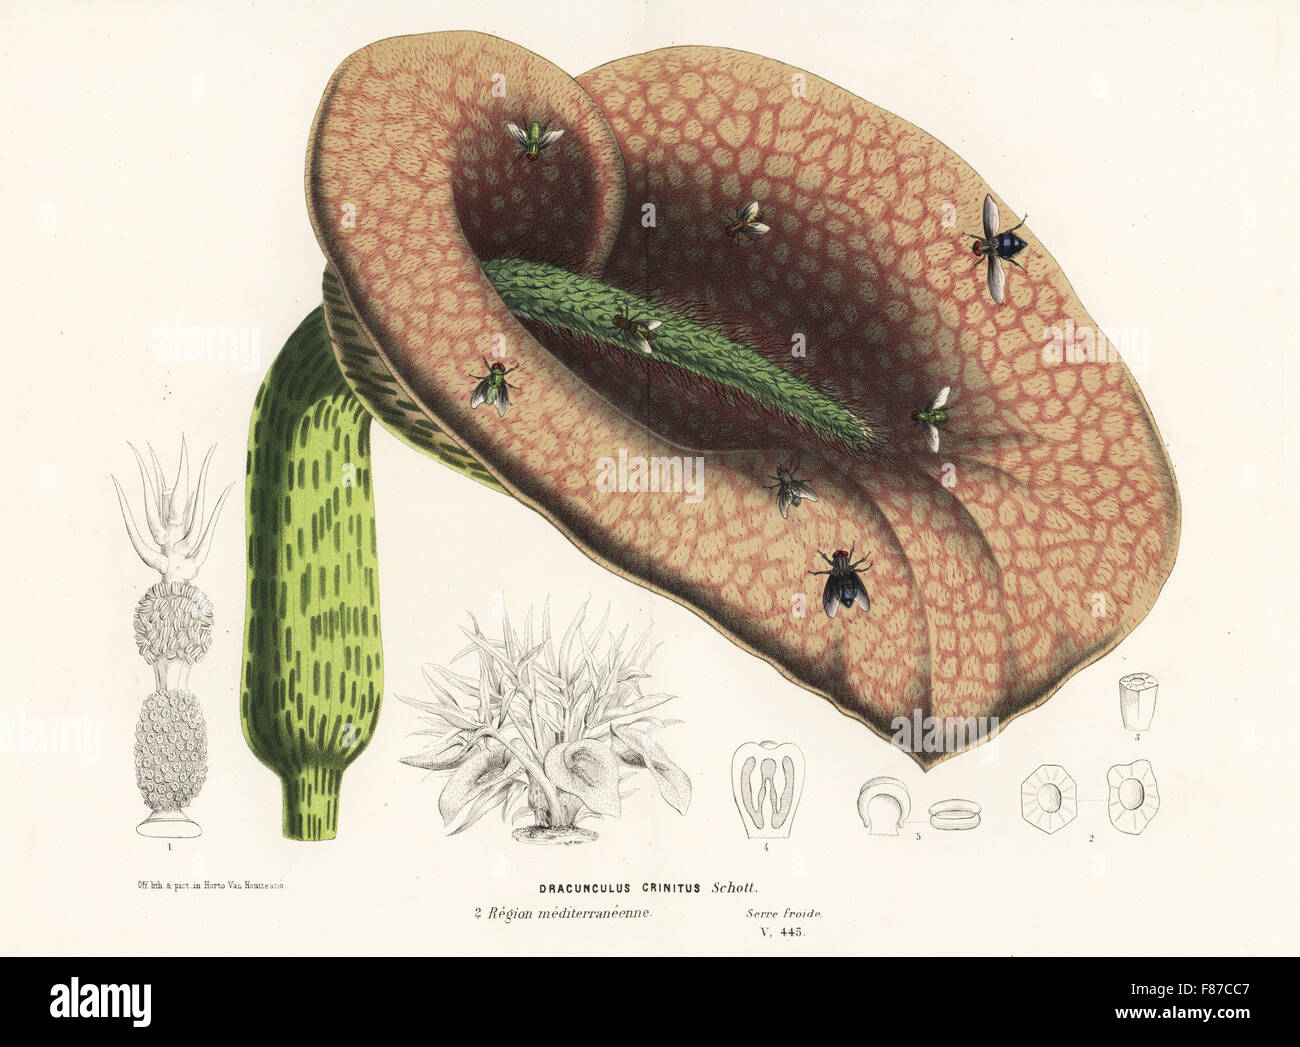 Dead horse arum lily, Helicodiceros muscivorus (Dracunculus crinitus) with blow flies. Handcoloured lithograph from Louis van Houtte and Charles Lemaire's Flowers of the Gardens and Hothouses of Europe, Flore des Serres et des Jardins de l'Europe, Ghent, Belgium, 1870. Stock Photo